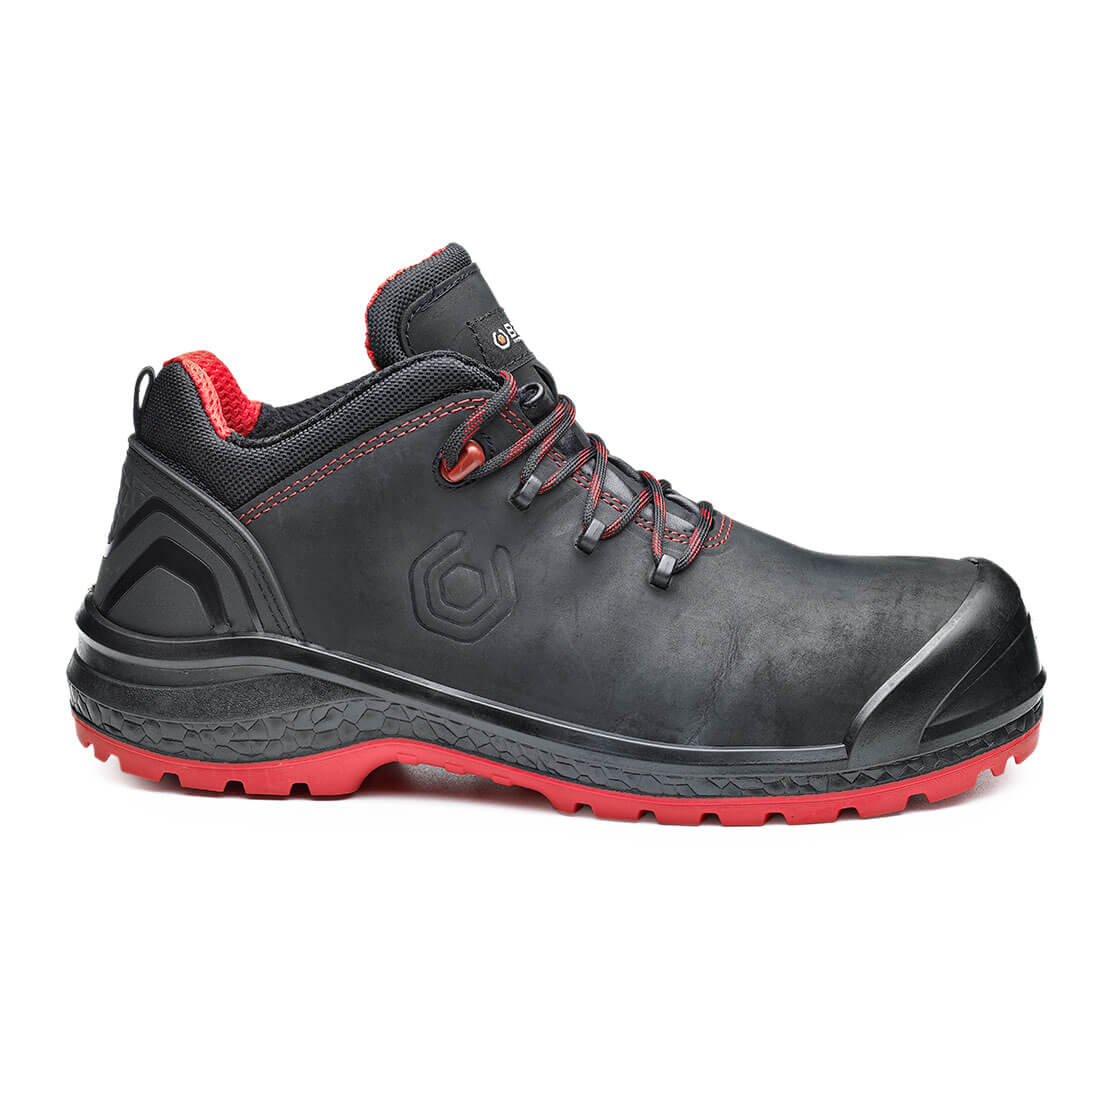 Base Be-Uniform Toe Cap Work Safety Shoes Black/Red 1#colour_black-red